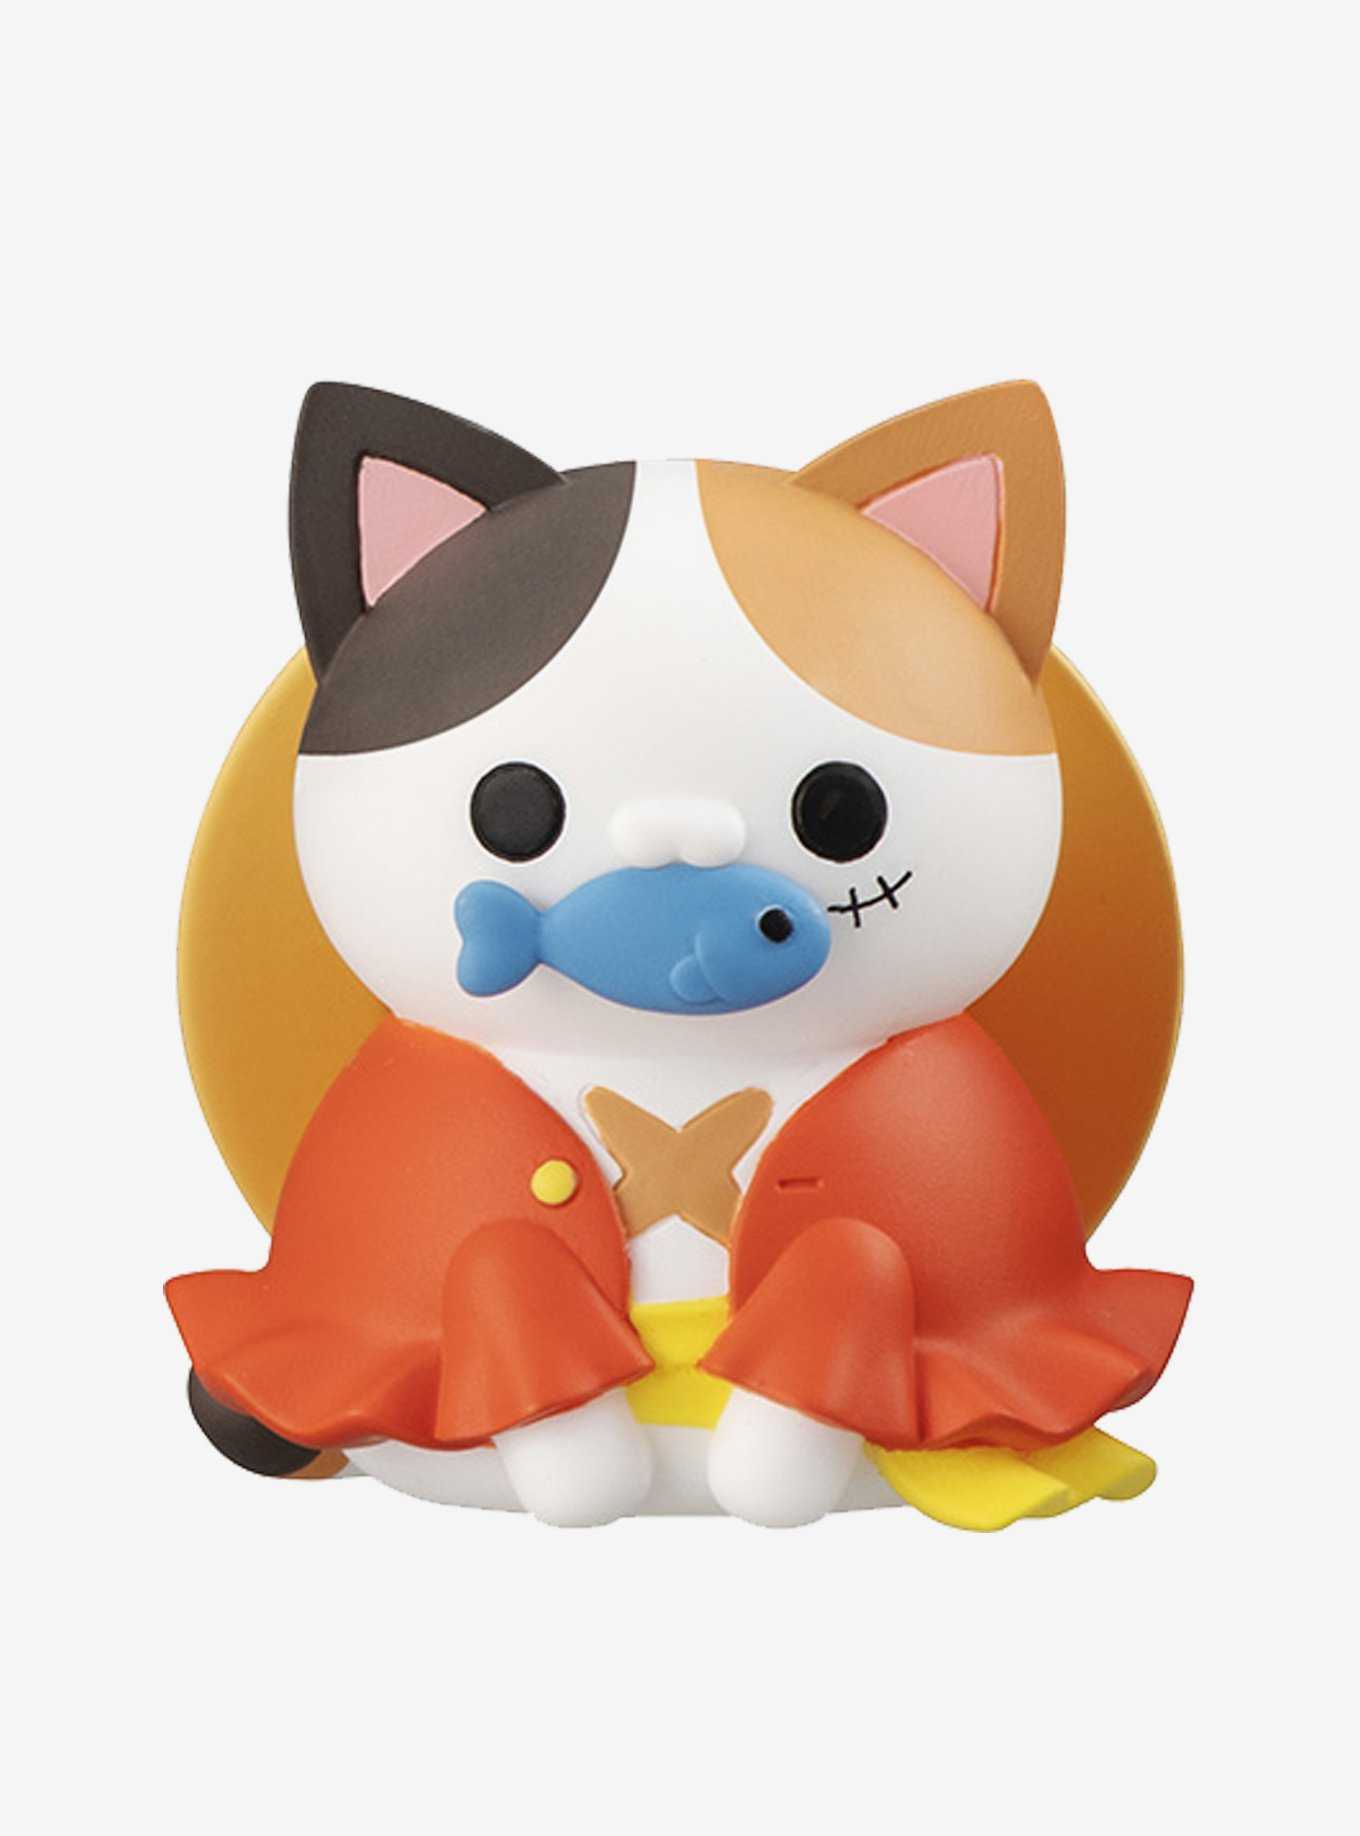 Megahouse One Piece Mega Cat Project Nyan Piece Nyan! I'm Gonna Be King of Paw-rates! Blind Box Figure, , hi-res